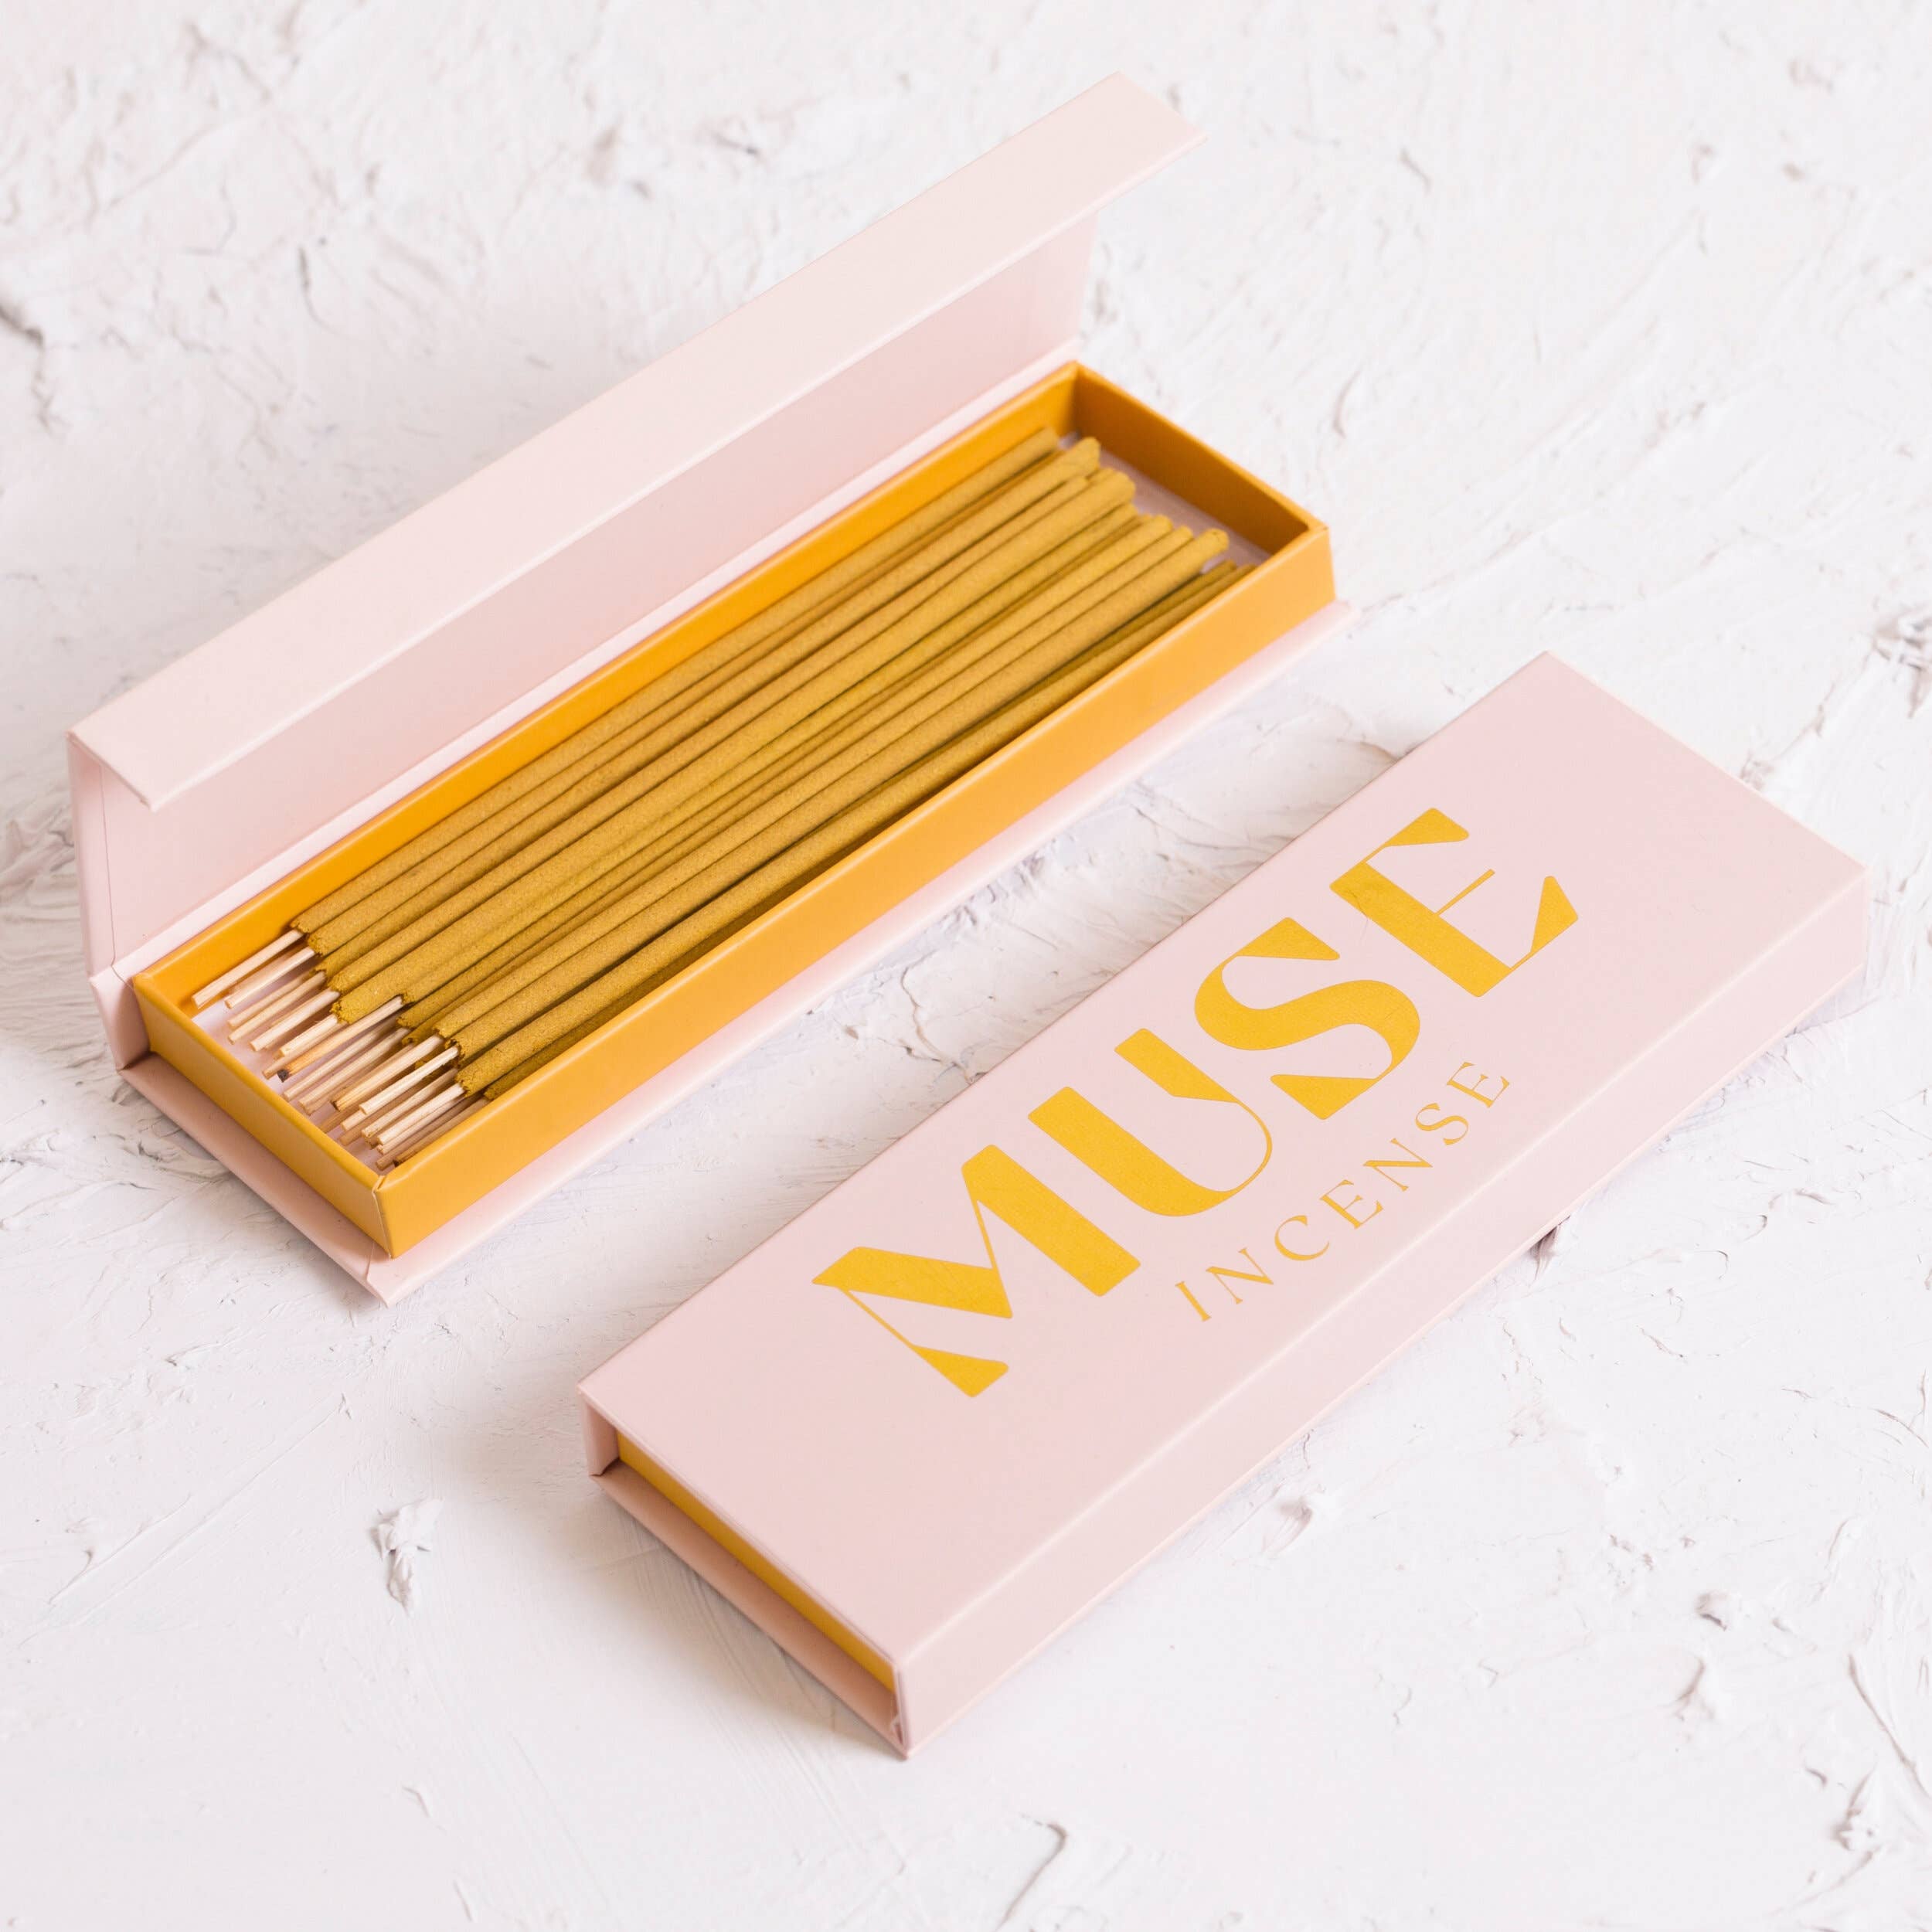 Muse Incense Candles + Incense